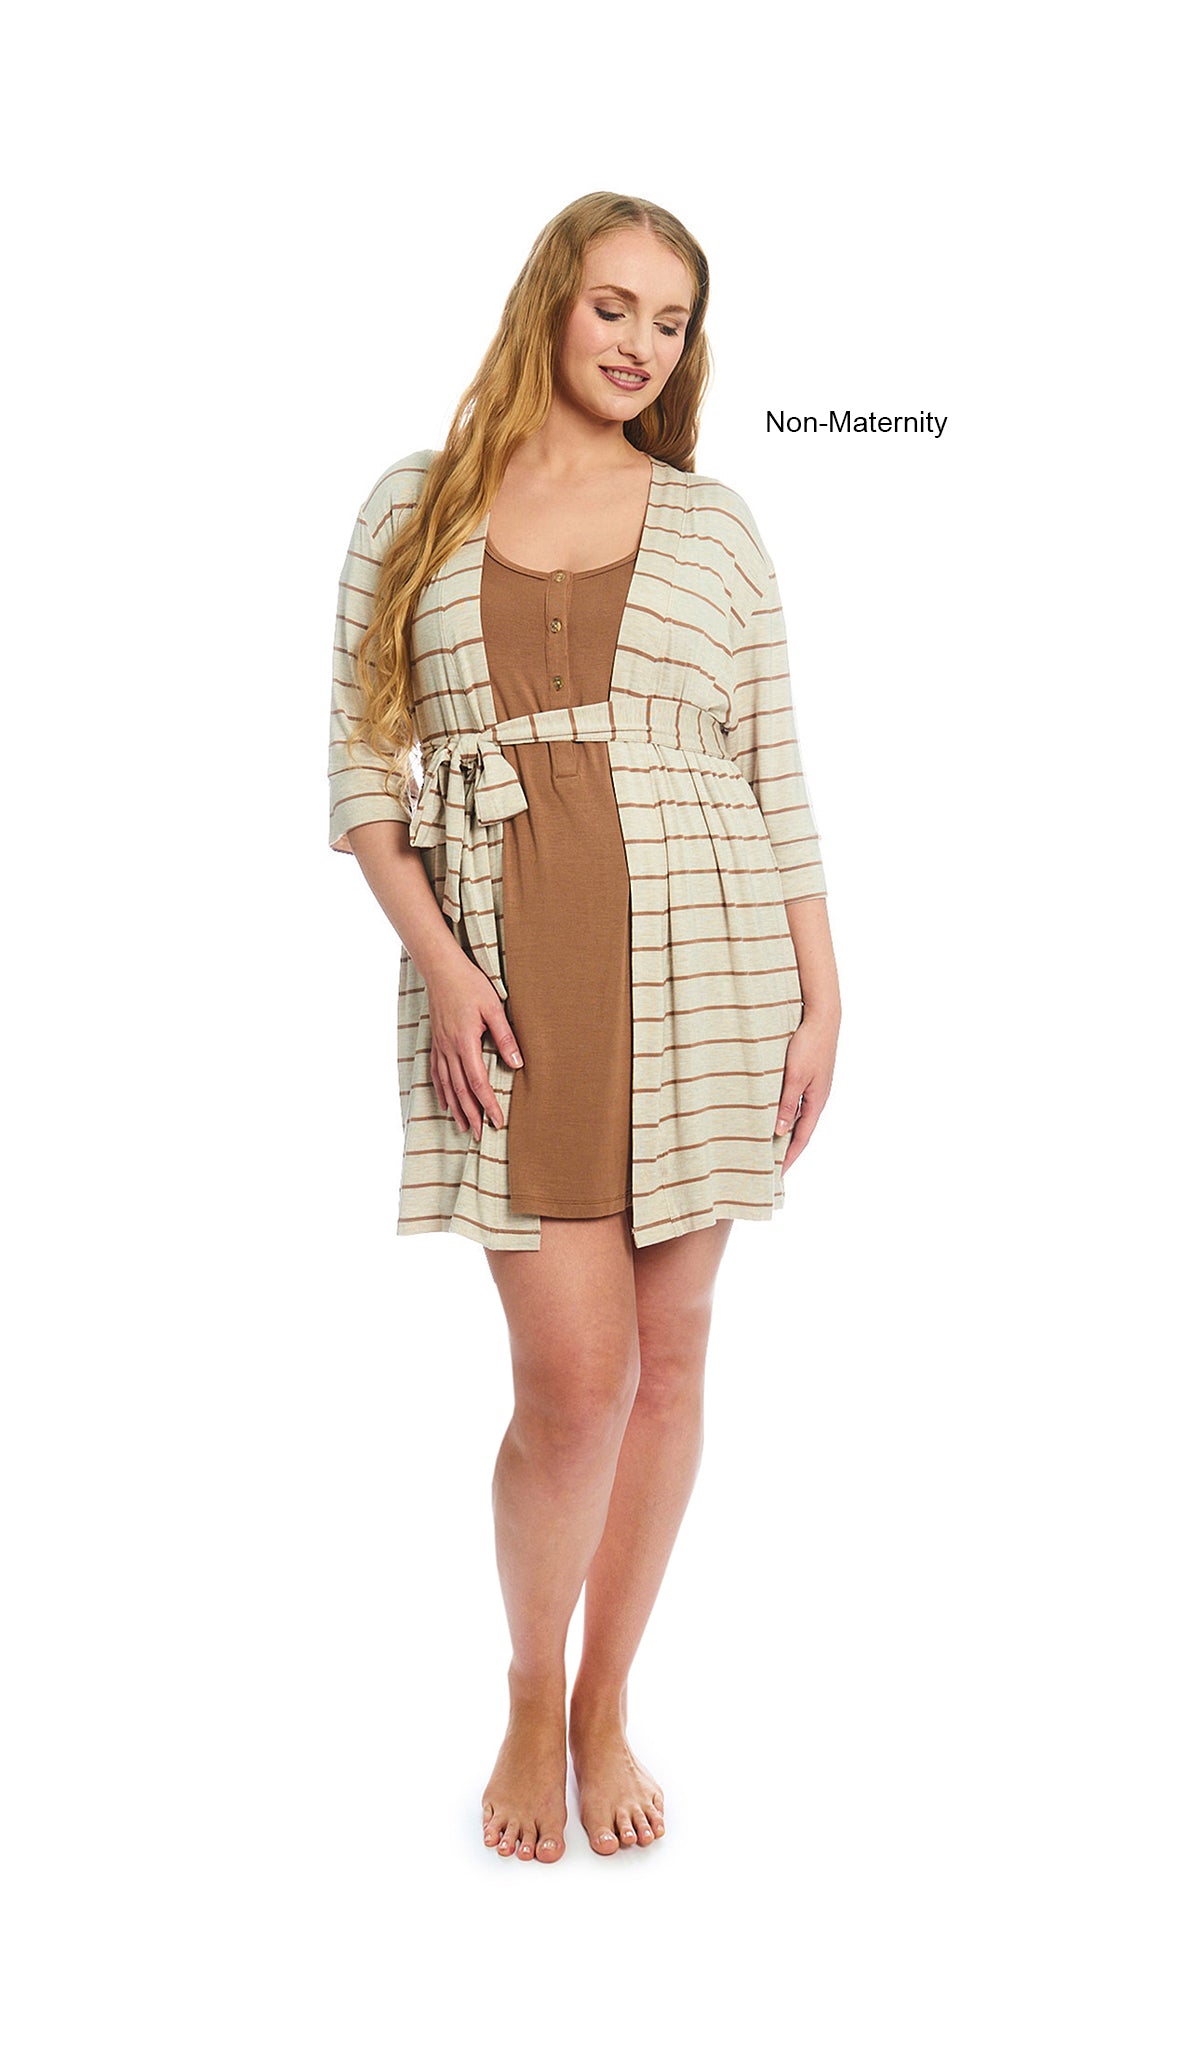 Mocha Stripe Carolyn 2-Piece Set. Woman 3/4 sleeve robe and short sleeve button front placket nightgown as non-maternity.